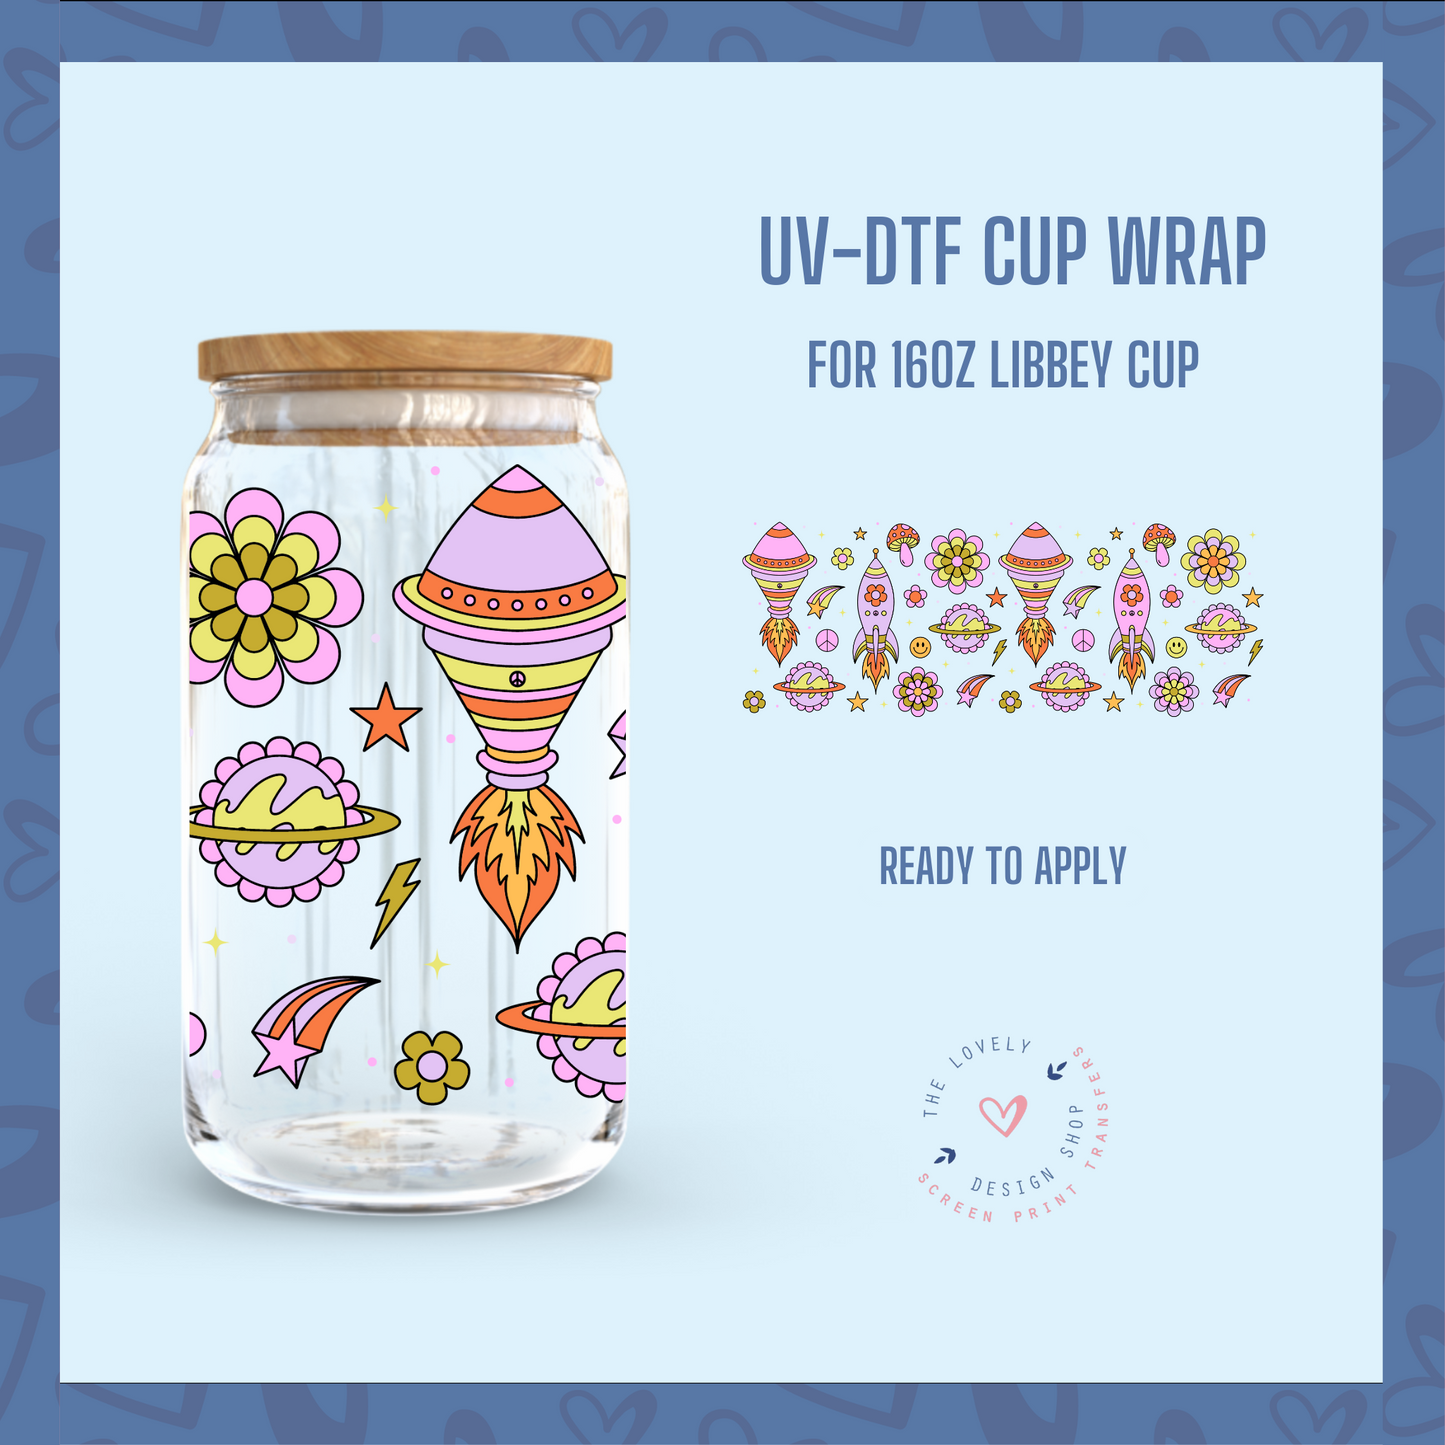 Give Me Space - UV DTF 16 oz Libbey Cup Wrap (Ready to Ship) Apr 1